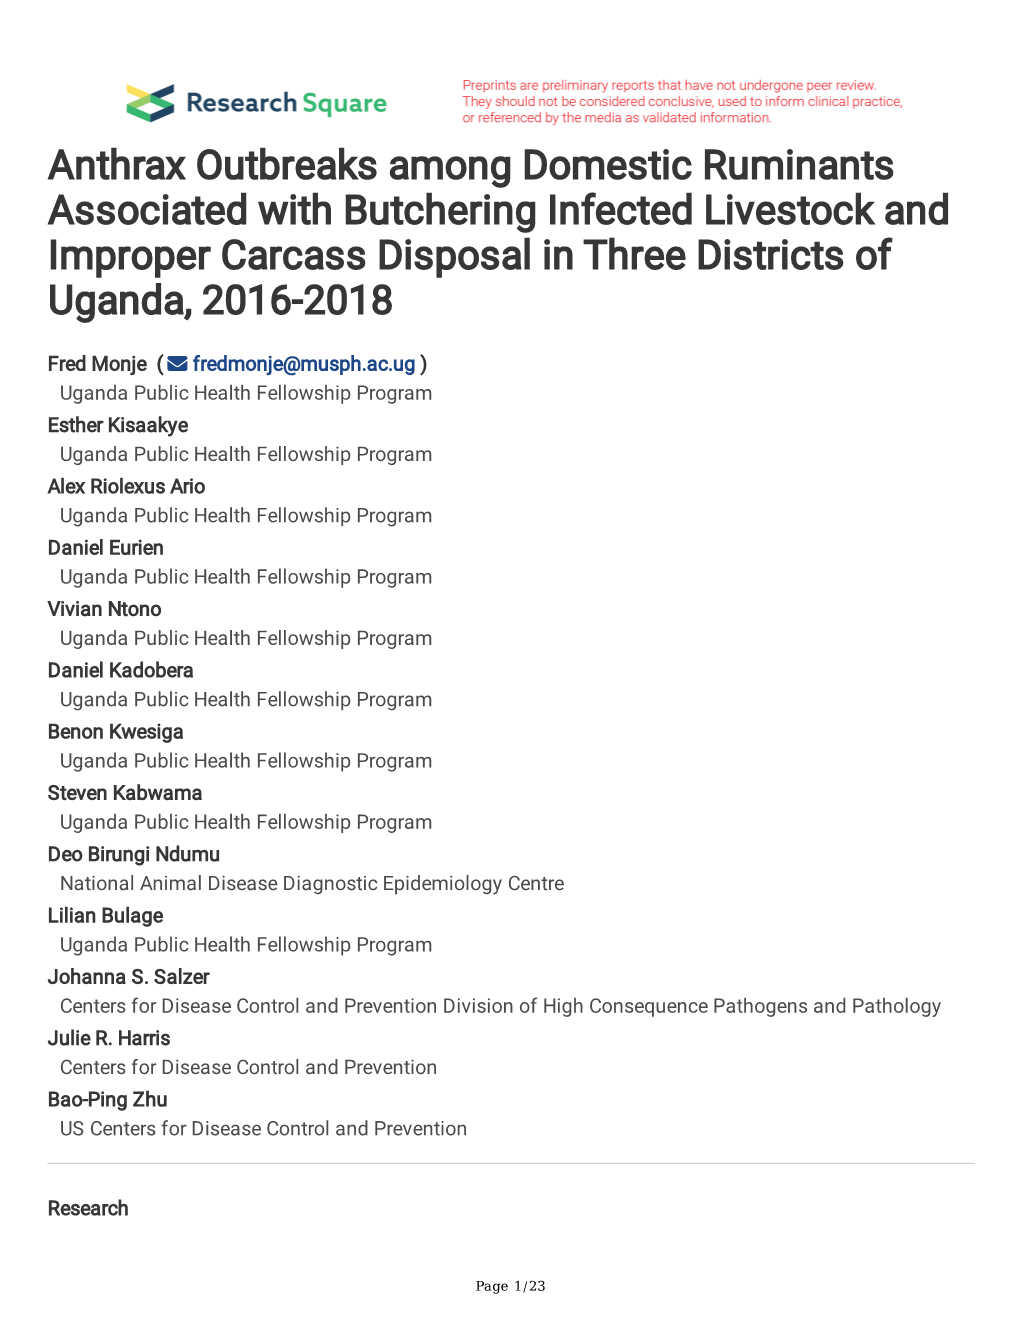 Anthrax Outbreaks Among Domestic Ruminants Associated with Butchering Infected Livestock and Improper Carcass Disposal in Three Districts of Uganda, 2016-2018